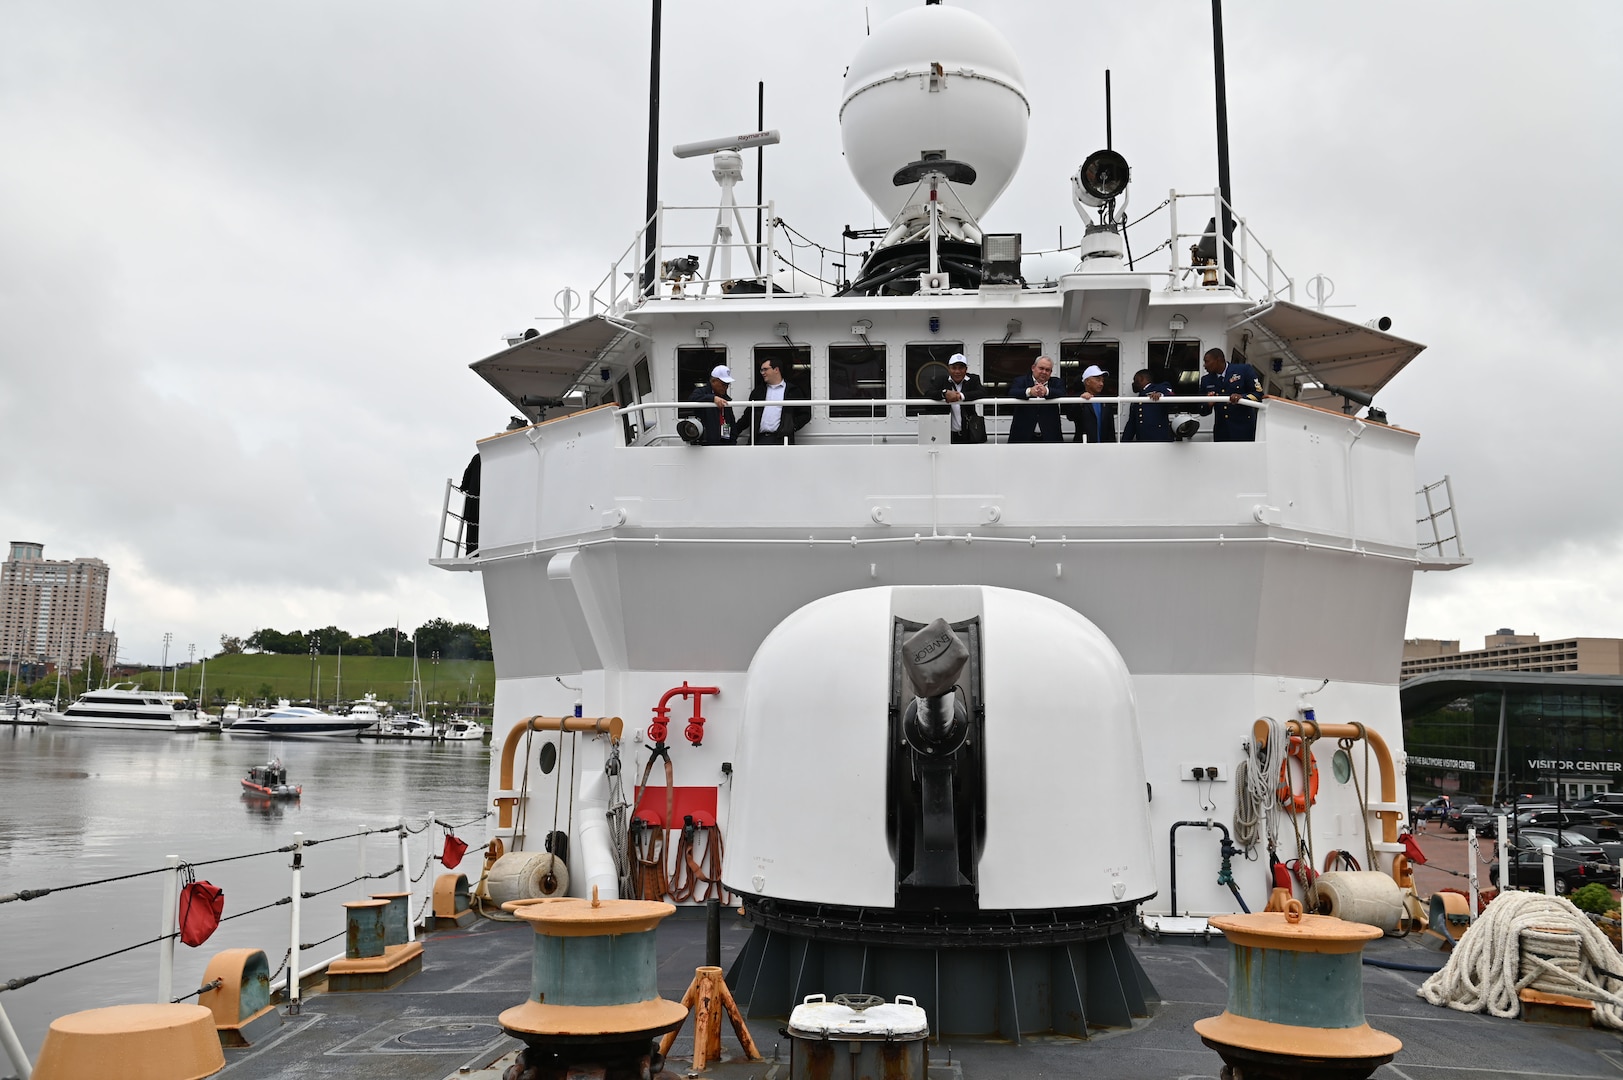 Pacific Island Forum attendees tour the Coast Guard Cutter Forward (WMEC 911) while the cutter was moored in Baltimore, Sept. 24, 2023. The cutter tour was a prelude to the official start of the U.S.- PIF Summit hosted by Commandant of the Coast Guard, Adm. Linda Fagan, and widely attended by Pacific Island leaders. (U.S. Coast Guard photo by Petty Officer 3rd Class Mikaela McGee).